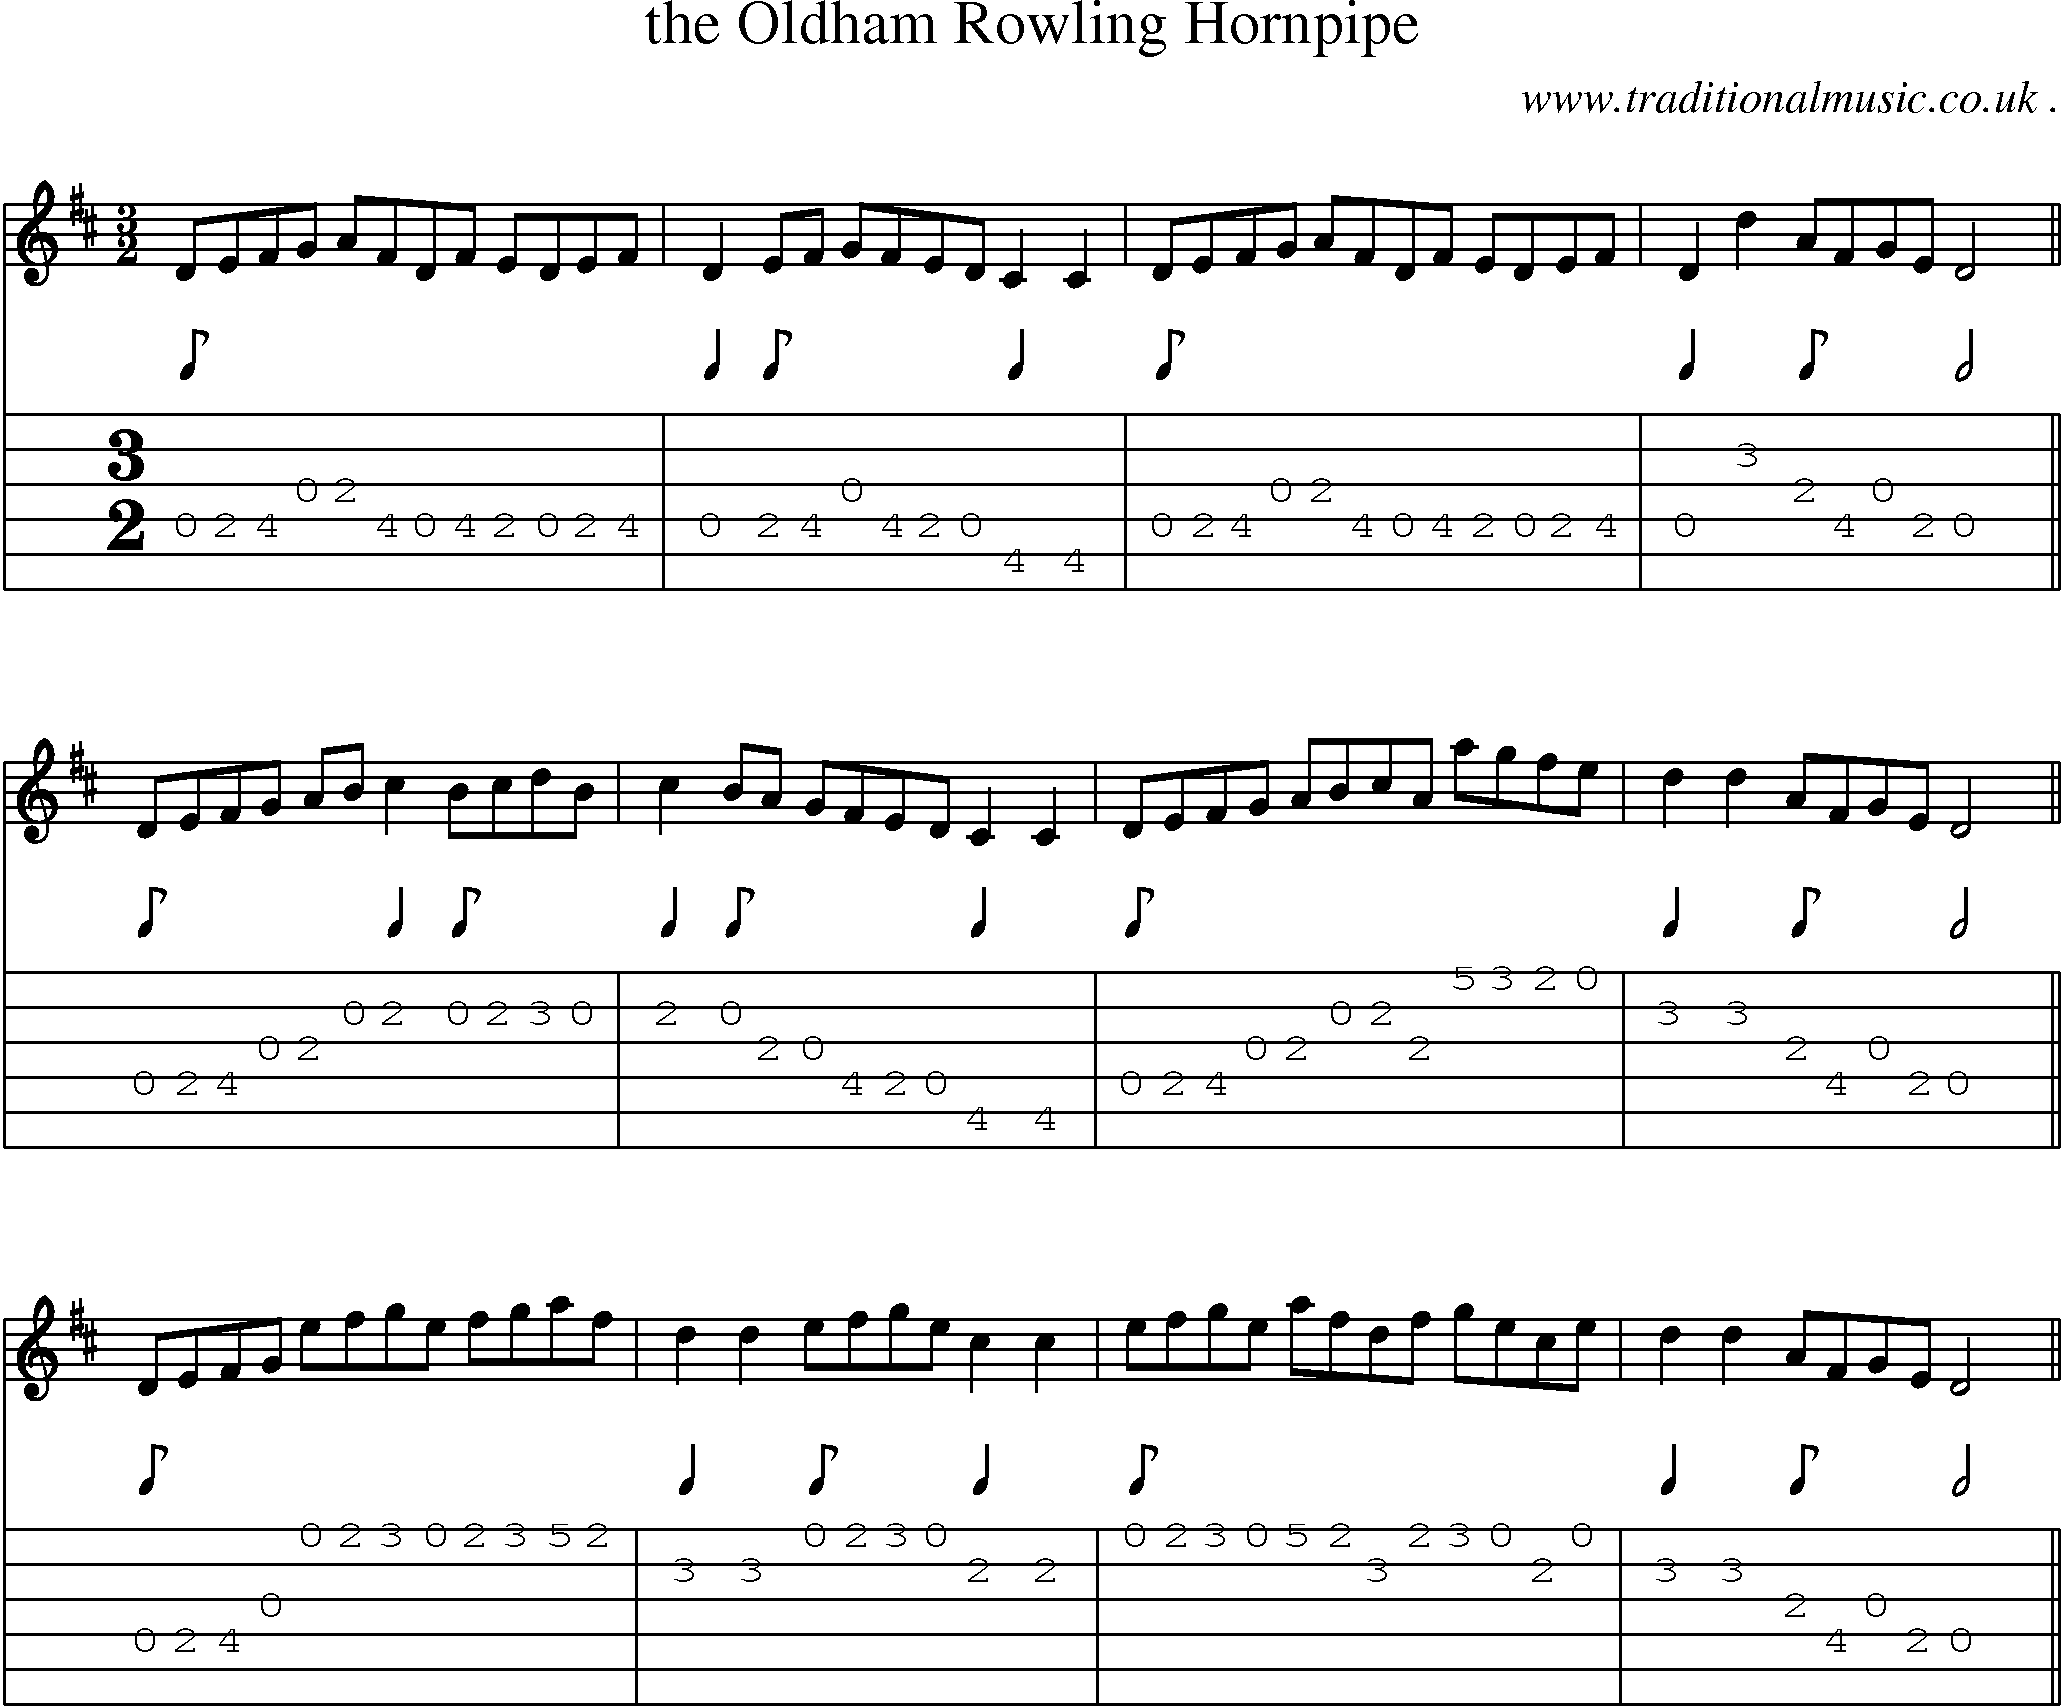 Sheet-Music and Guitar Tabs for The Oldham Rowling Hornpipe